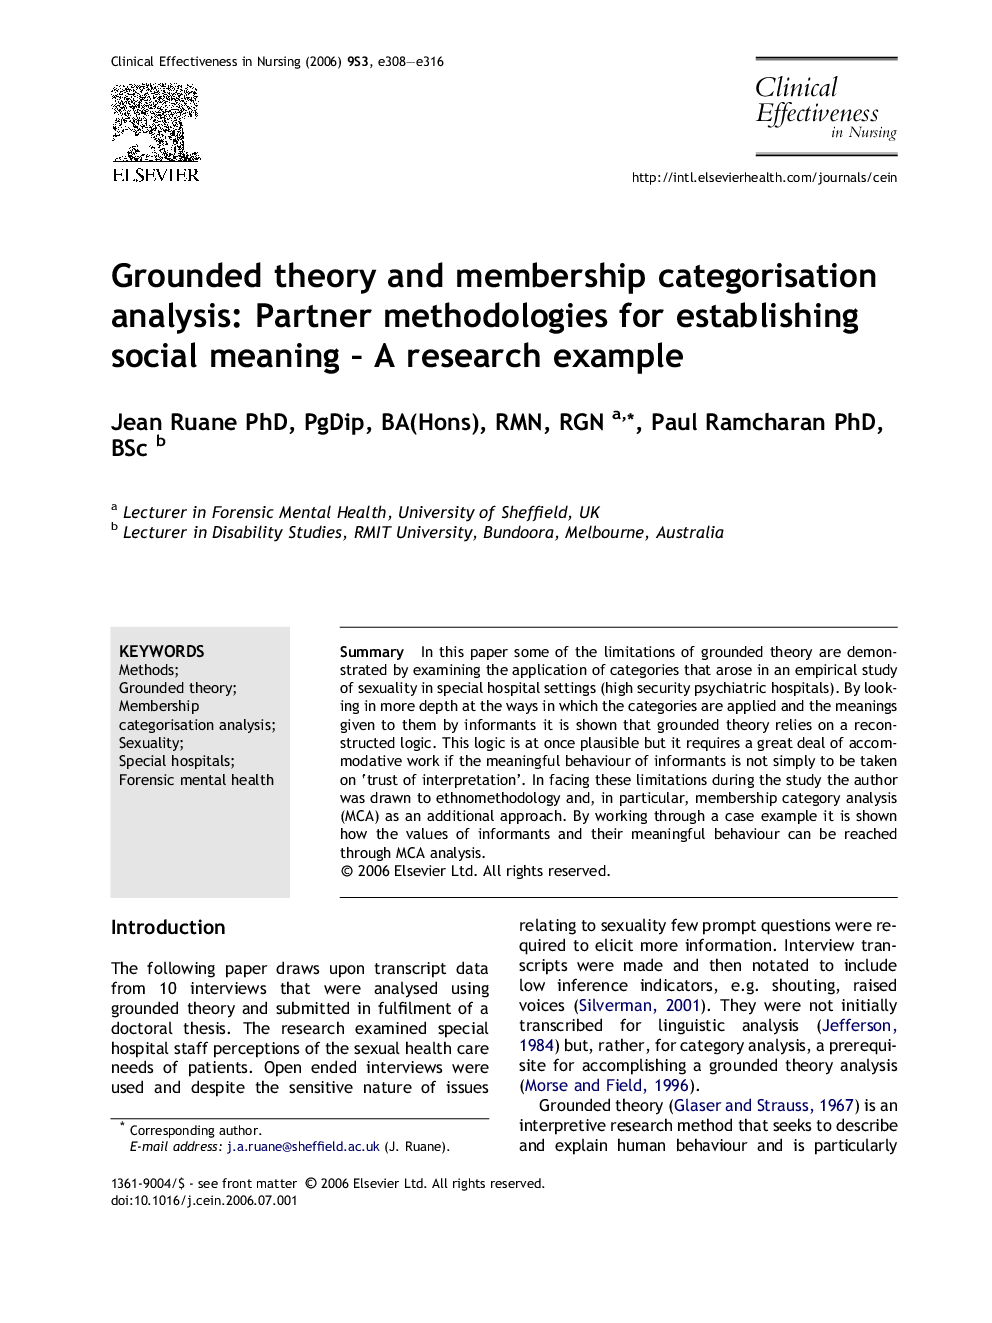 Grounded theory and membership categorisation analysis: Partner methodologies for establishing social meaning — A research example